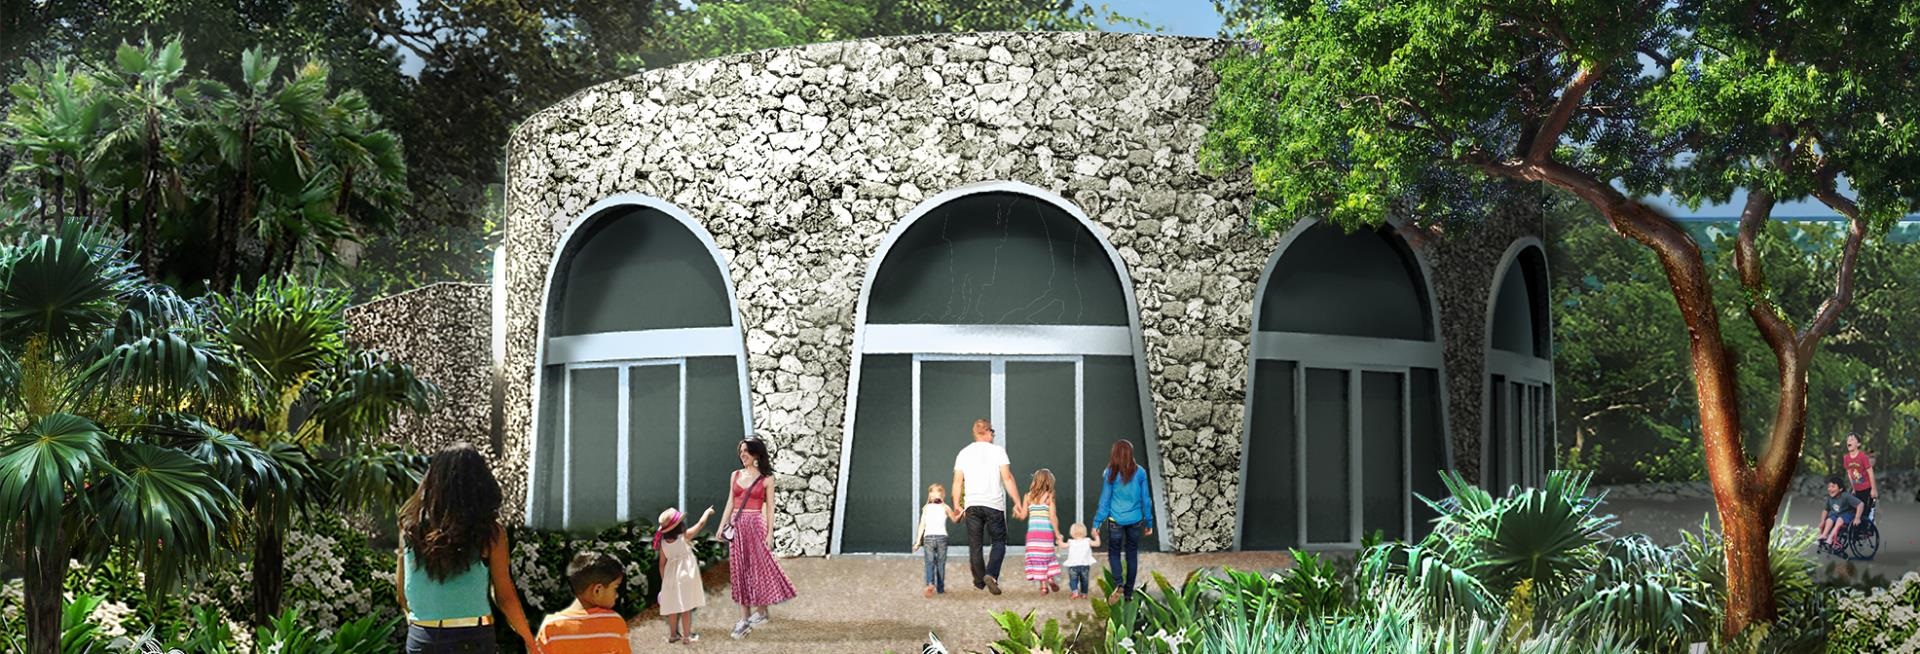 Conceptual Rendering of Inspiration Center at Pinecrest Gardens